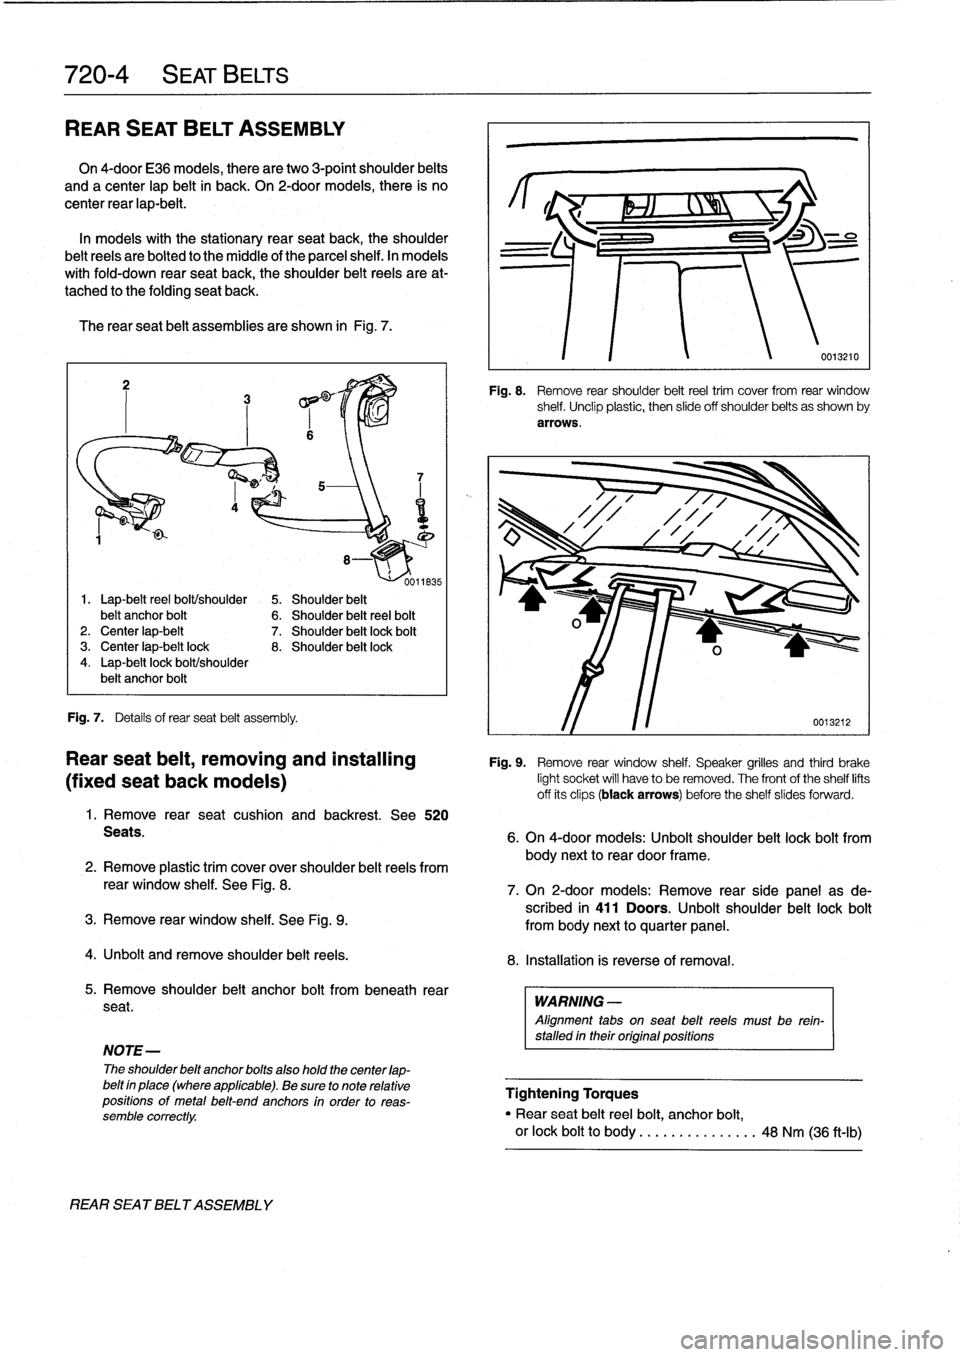 BMW M3 1993 E36 Repair Manual 
720-
4

	

SEAT
BELTS

REAR
SEAT
BELT
ASSEMBLY

On
4-door
E36
models,
there
are
two
3-point
shoulder
belts

and
a
center
lap
beltin
back
.
On
2-doormodels,
there
is
no

center
rear
lap-belt
.

In
mod